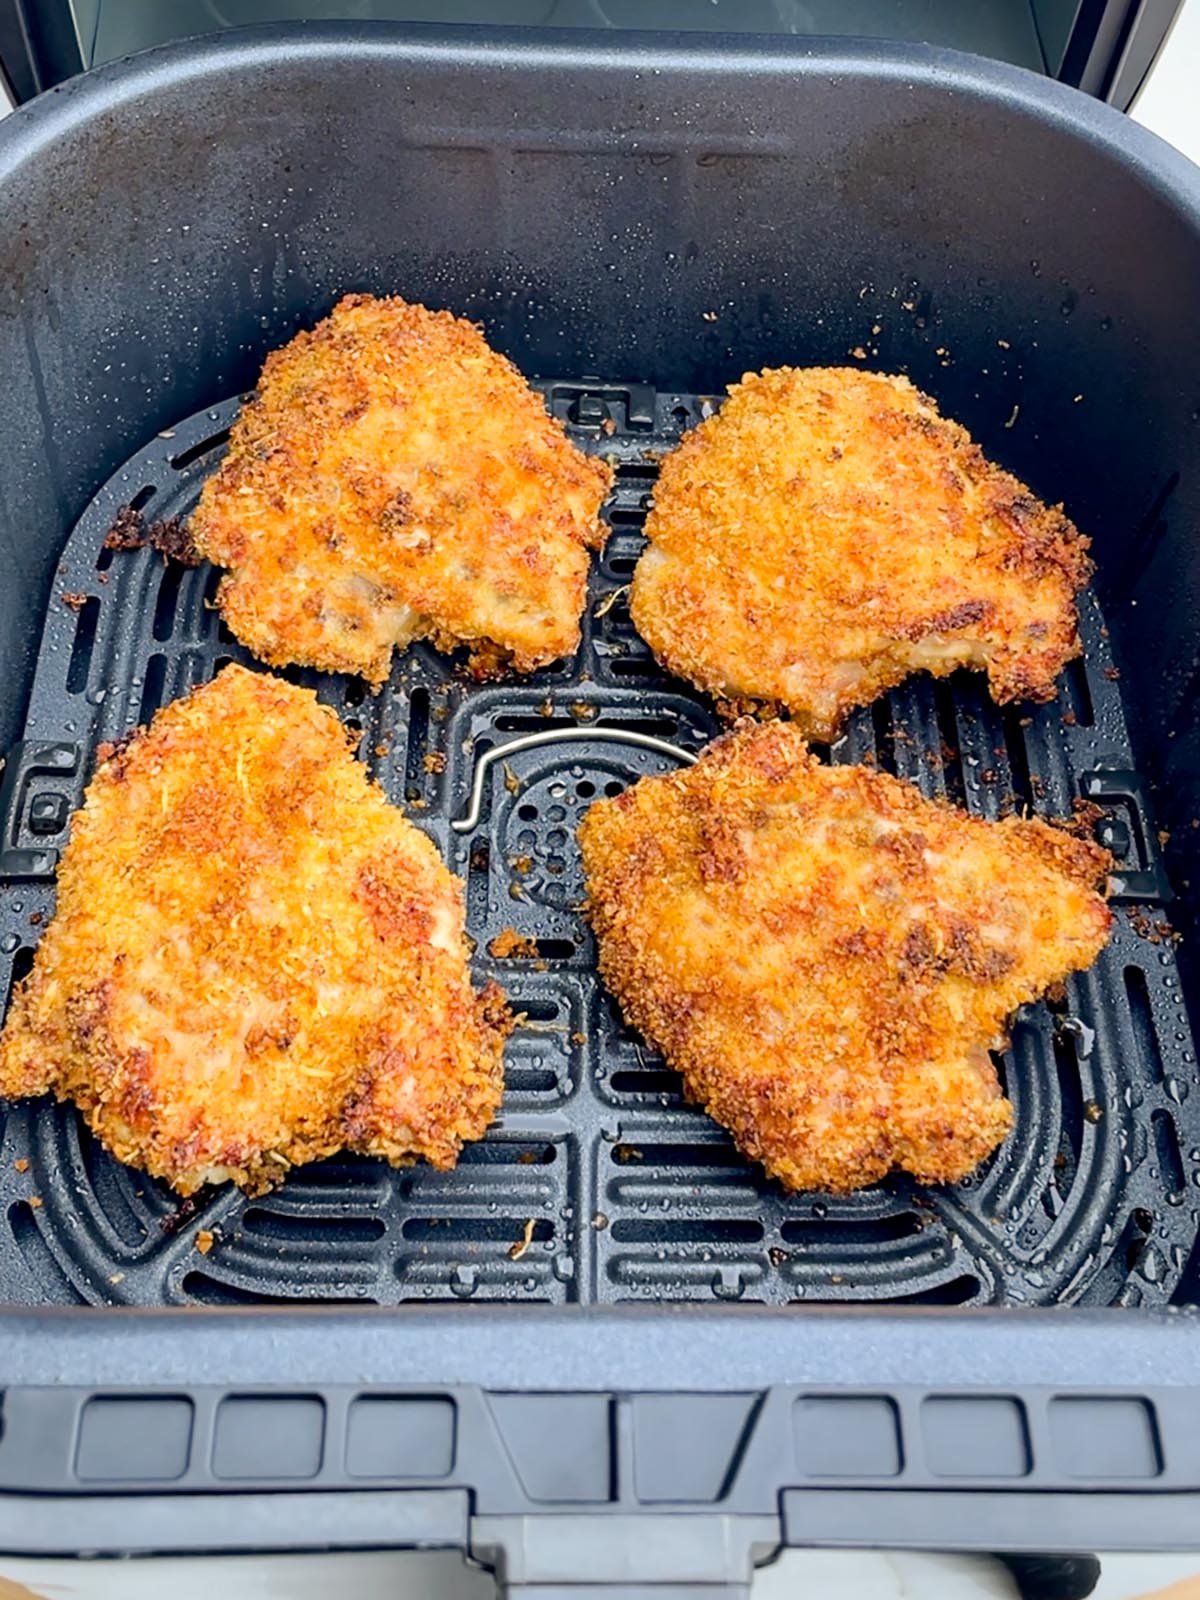 cooked panko coated bone-in chicken thighs in air fryer